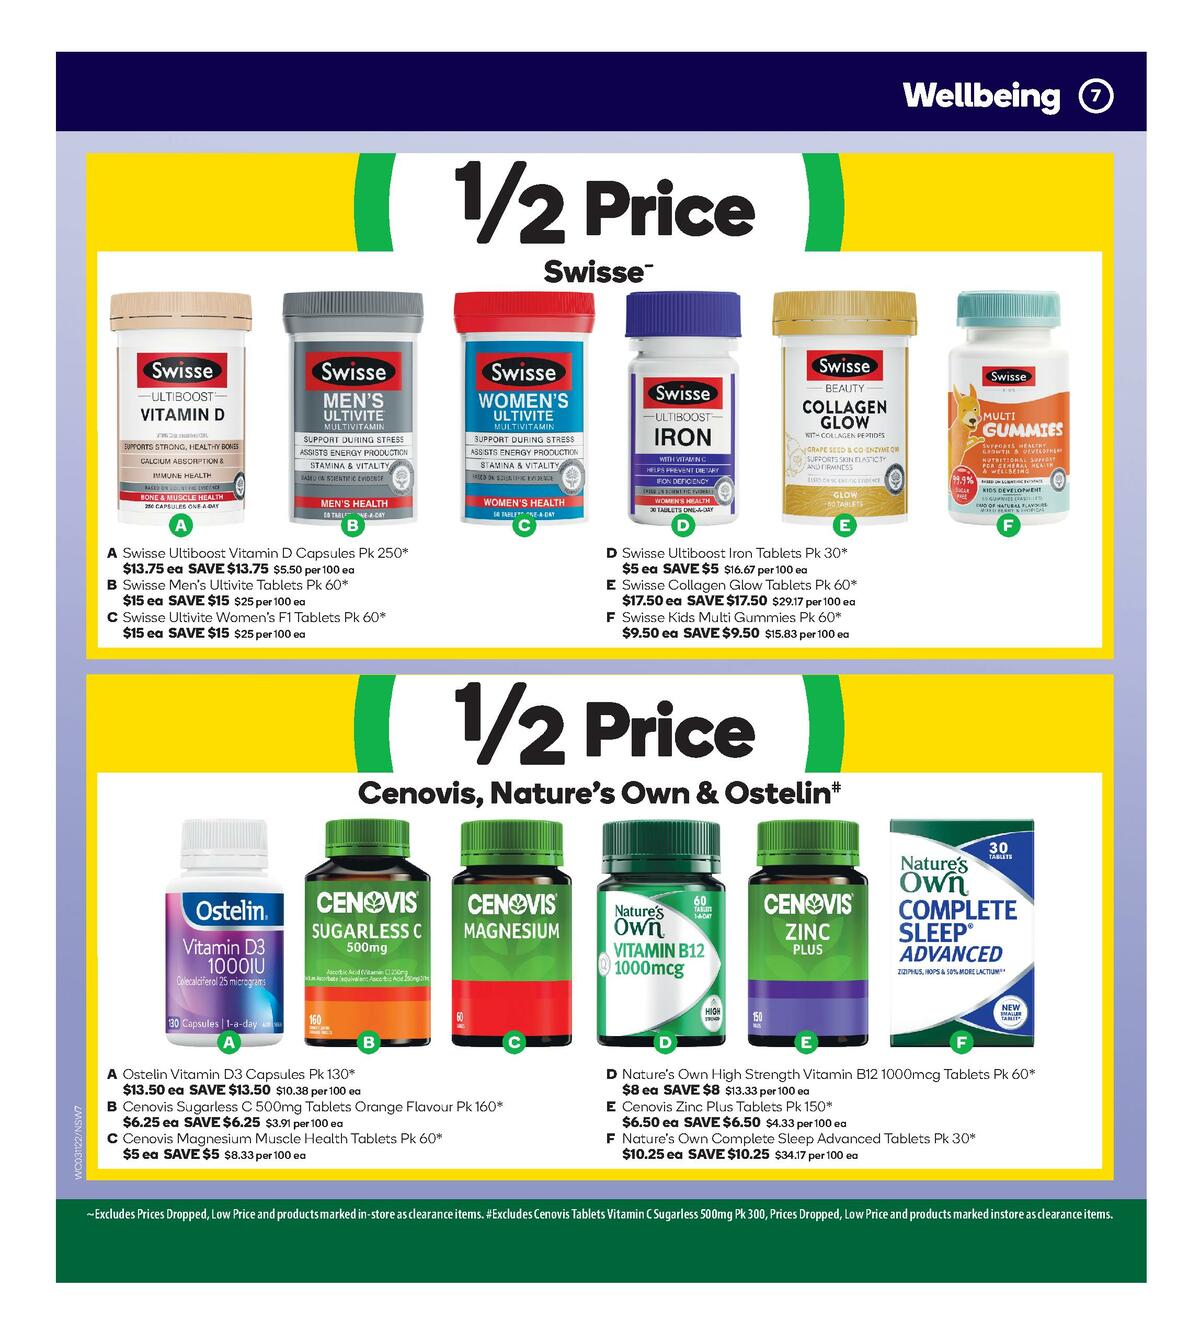 Woolworths Health & Beauty Catalogues from 3 November